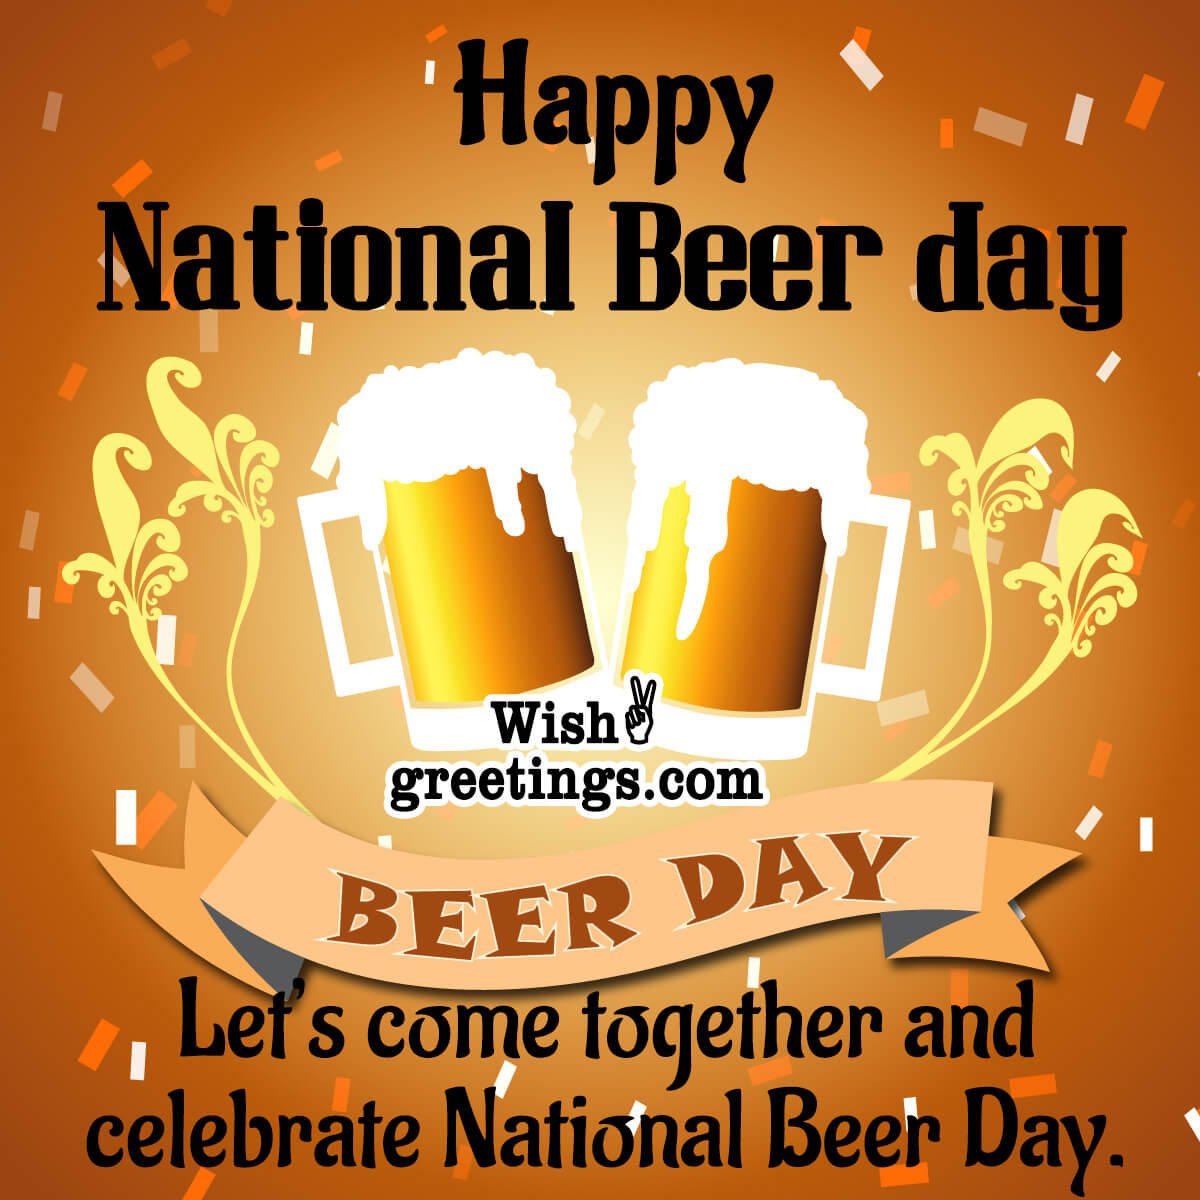 Happy National Beer Day